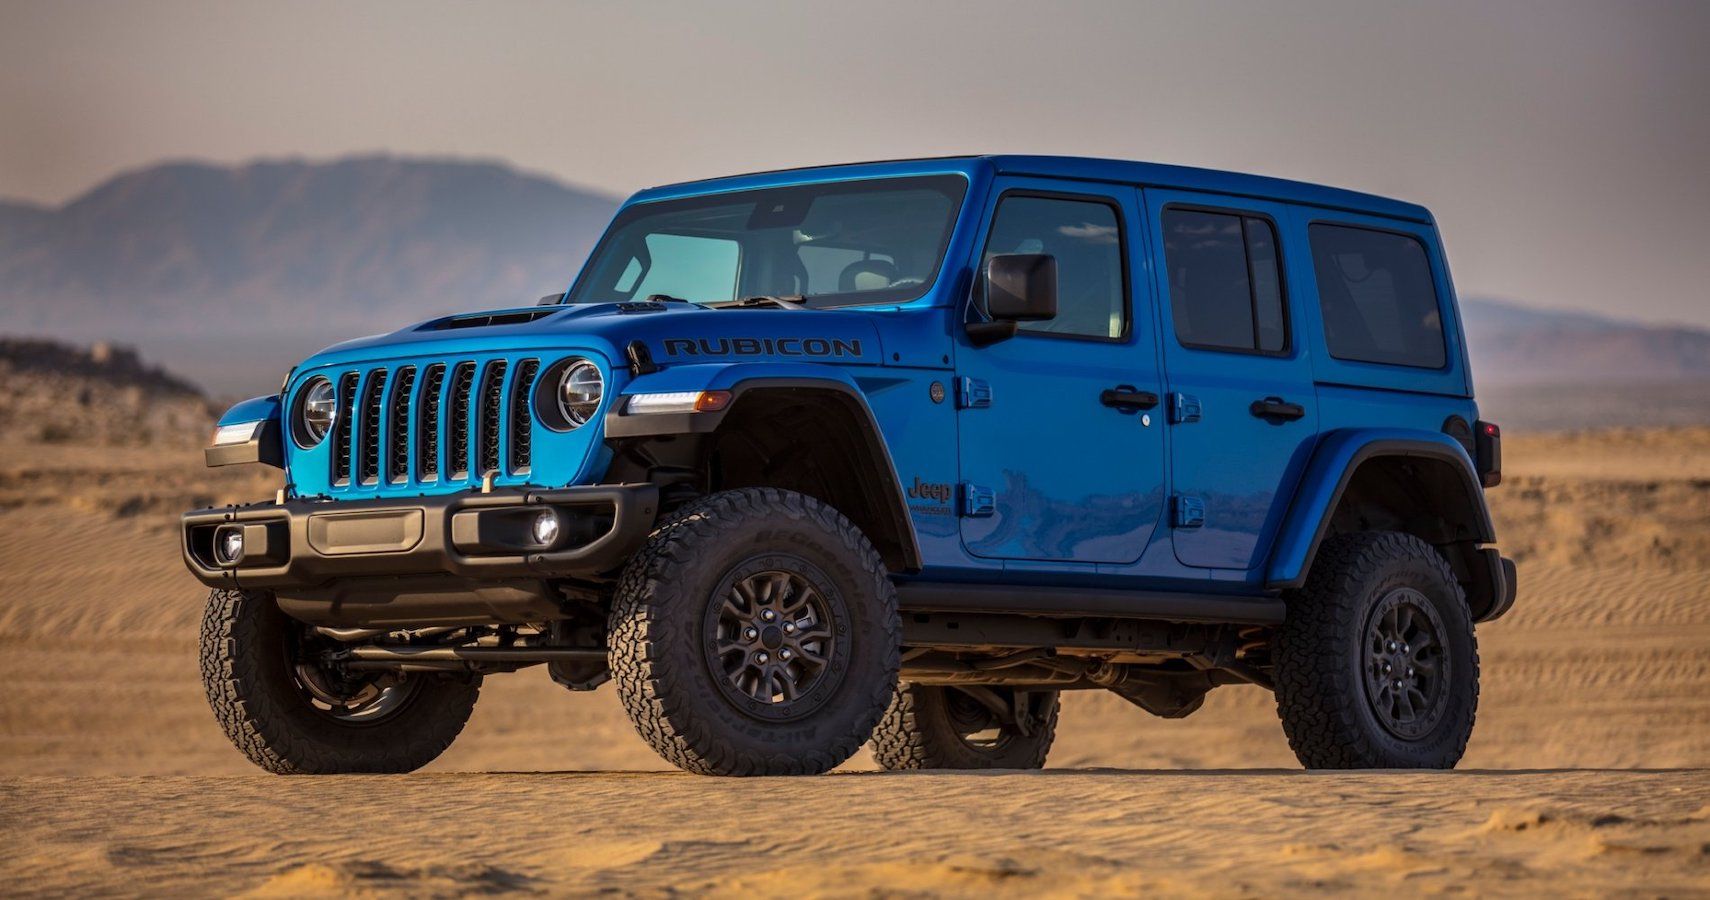 2021 Jeep Wrangler Rubicon 392 Debuts With Awesome Hydro